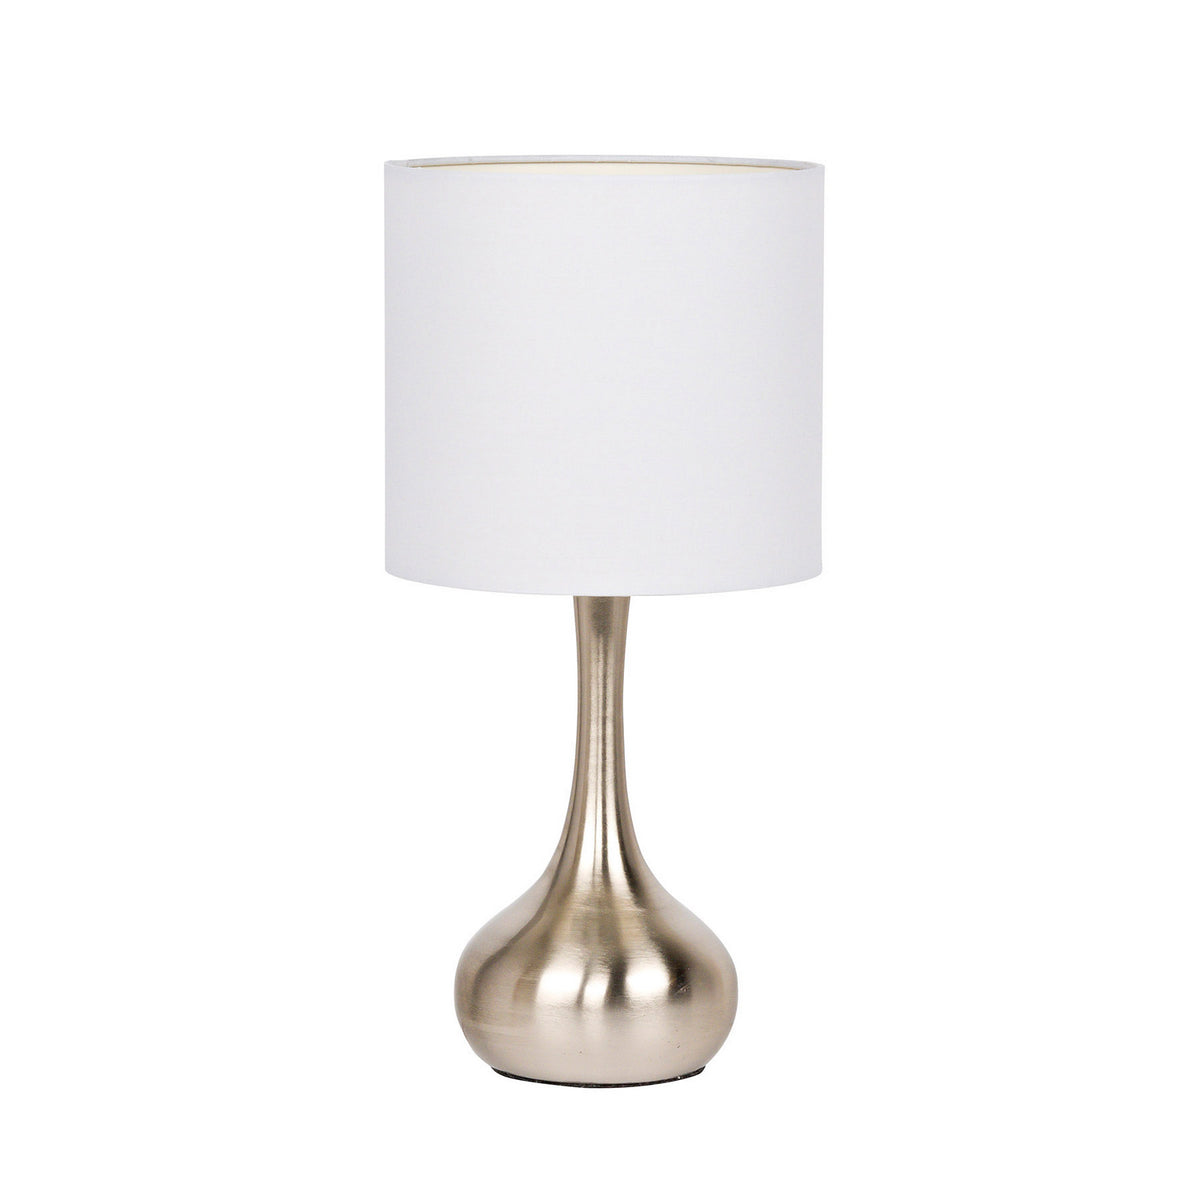 Craftmade - 86226 - One Light Table Lamp - Table Lamp - Brushed Polished Nickel